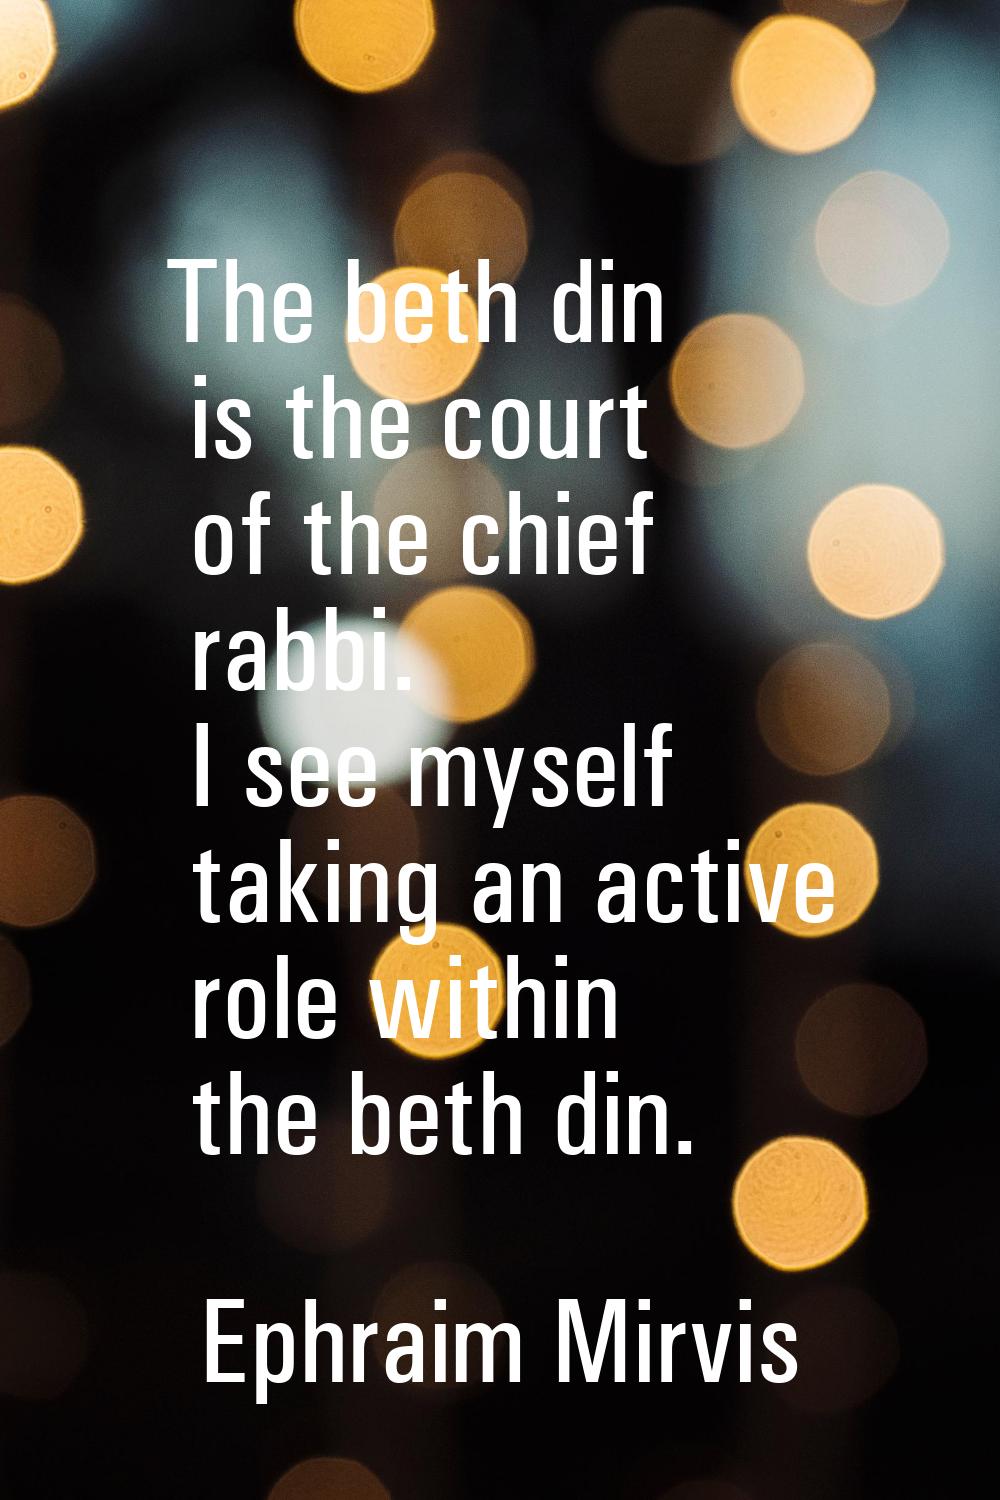 The beth din is the court of the chief rabbi. I see myself taking an active role within the beth di